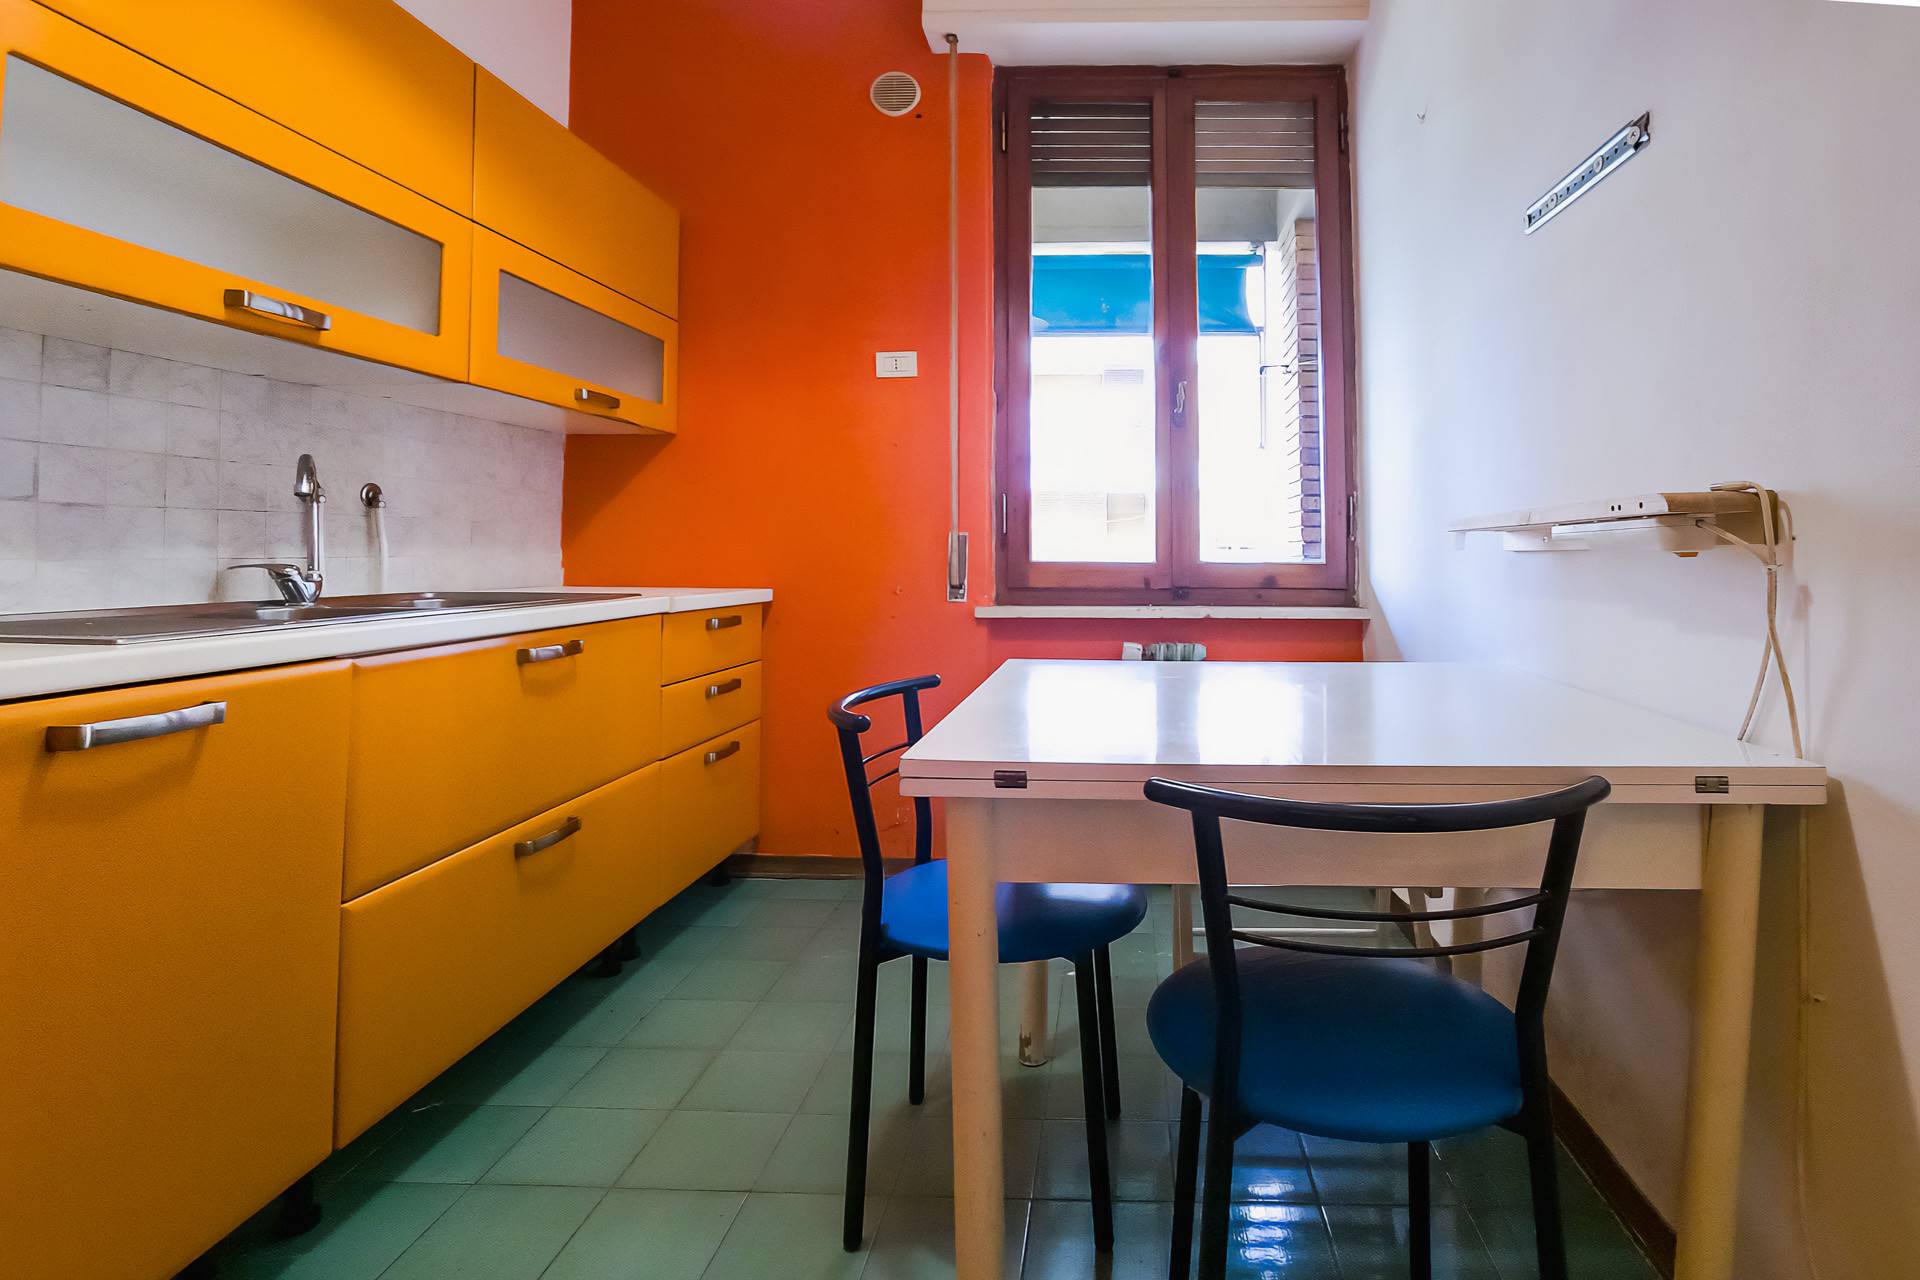 UNCINELLO, SIENA, Apartment for sale of 61 Sq. mt., Be restored, Heating Centralized, Energetic class: E, Epi: 78,666 kwh/m2 year, placed at 2° on 5, composed by: 3 Rooms, Little kitchen, , 1 Bedroom,